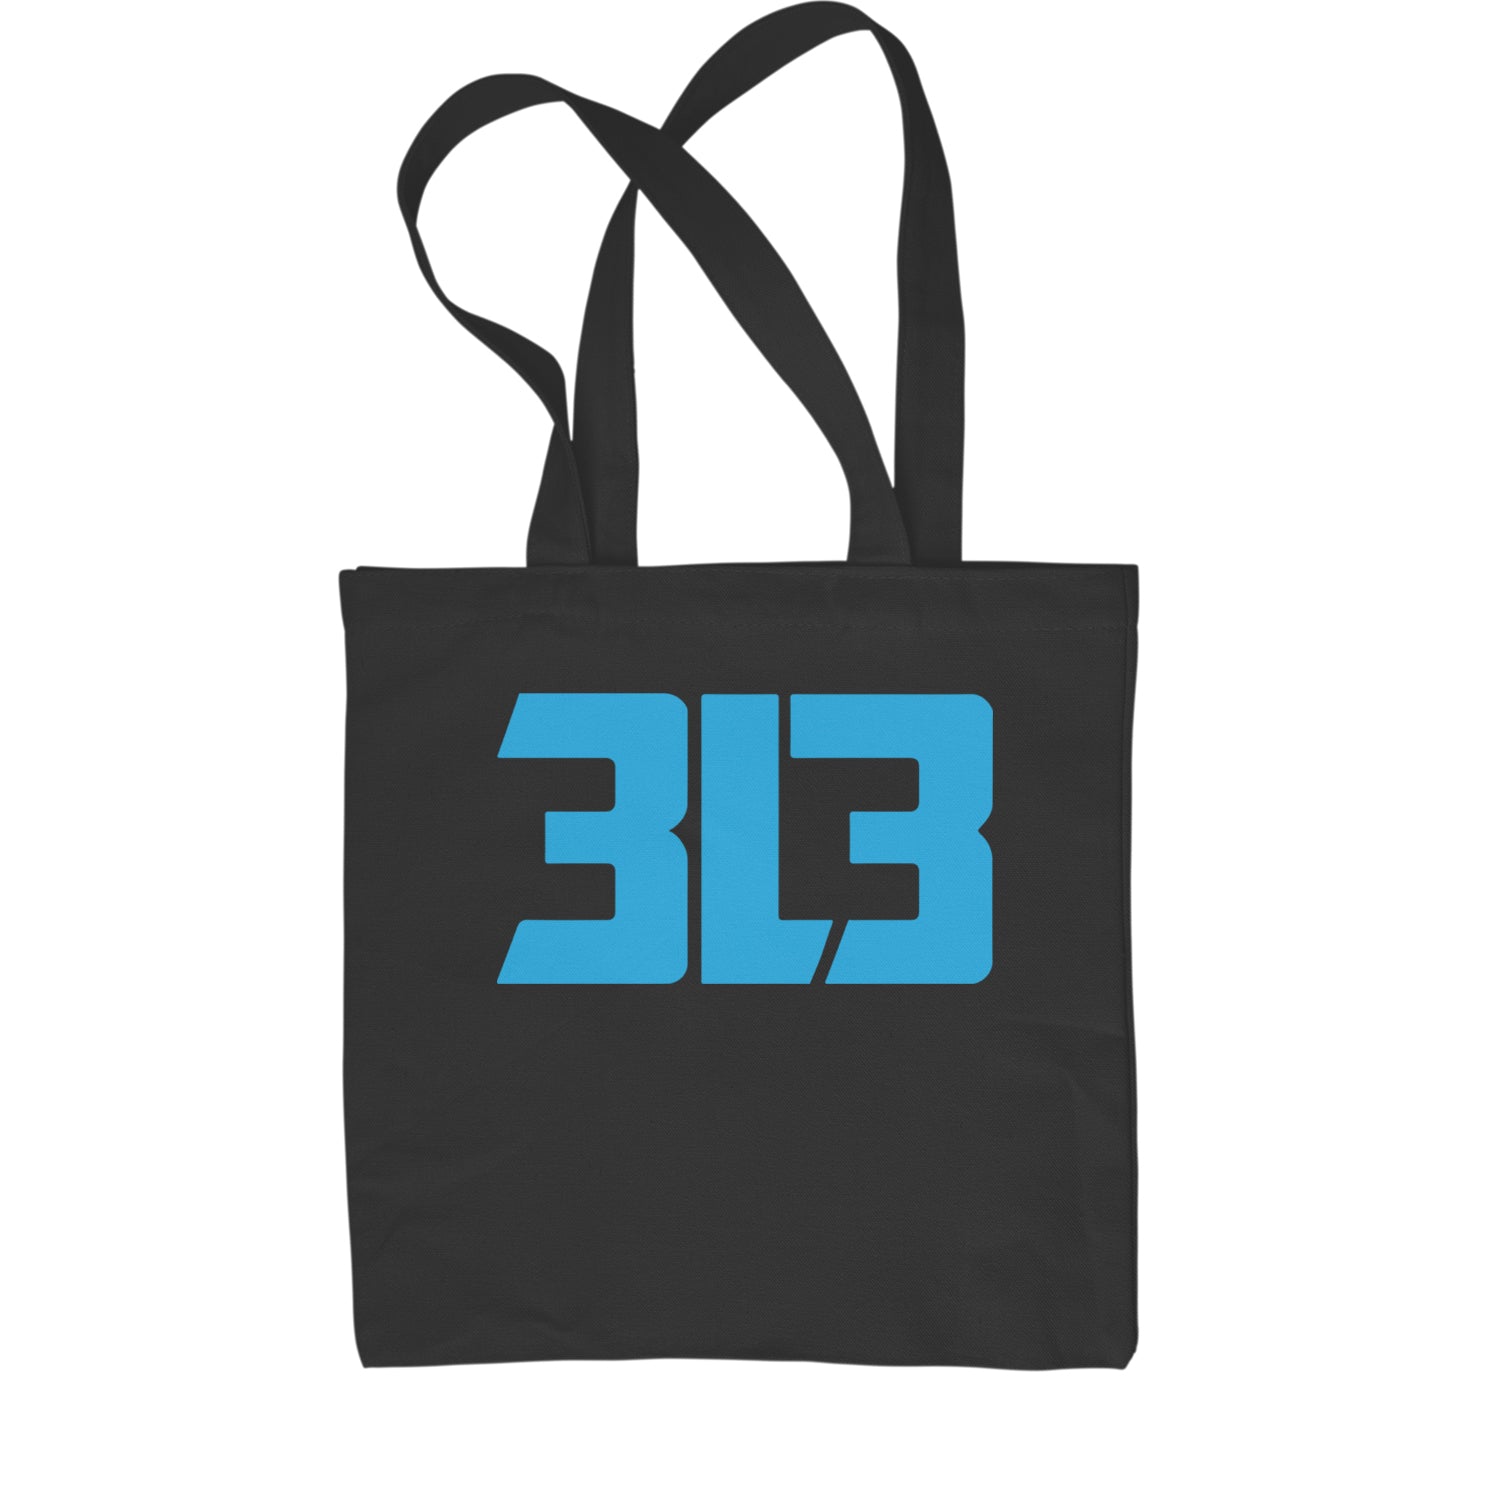 3L3 From The 313 Detroit Football Shopping Tote Bag